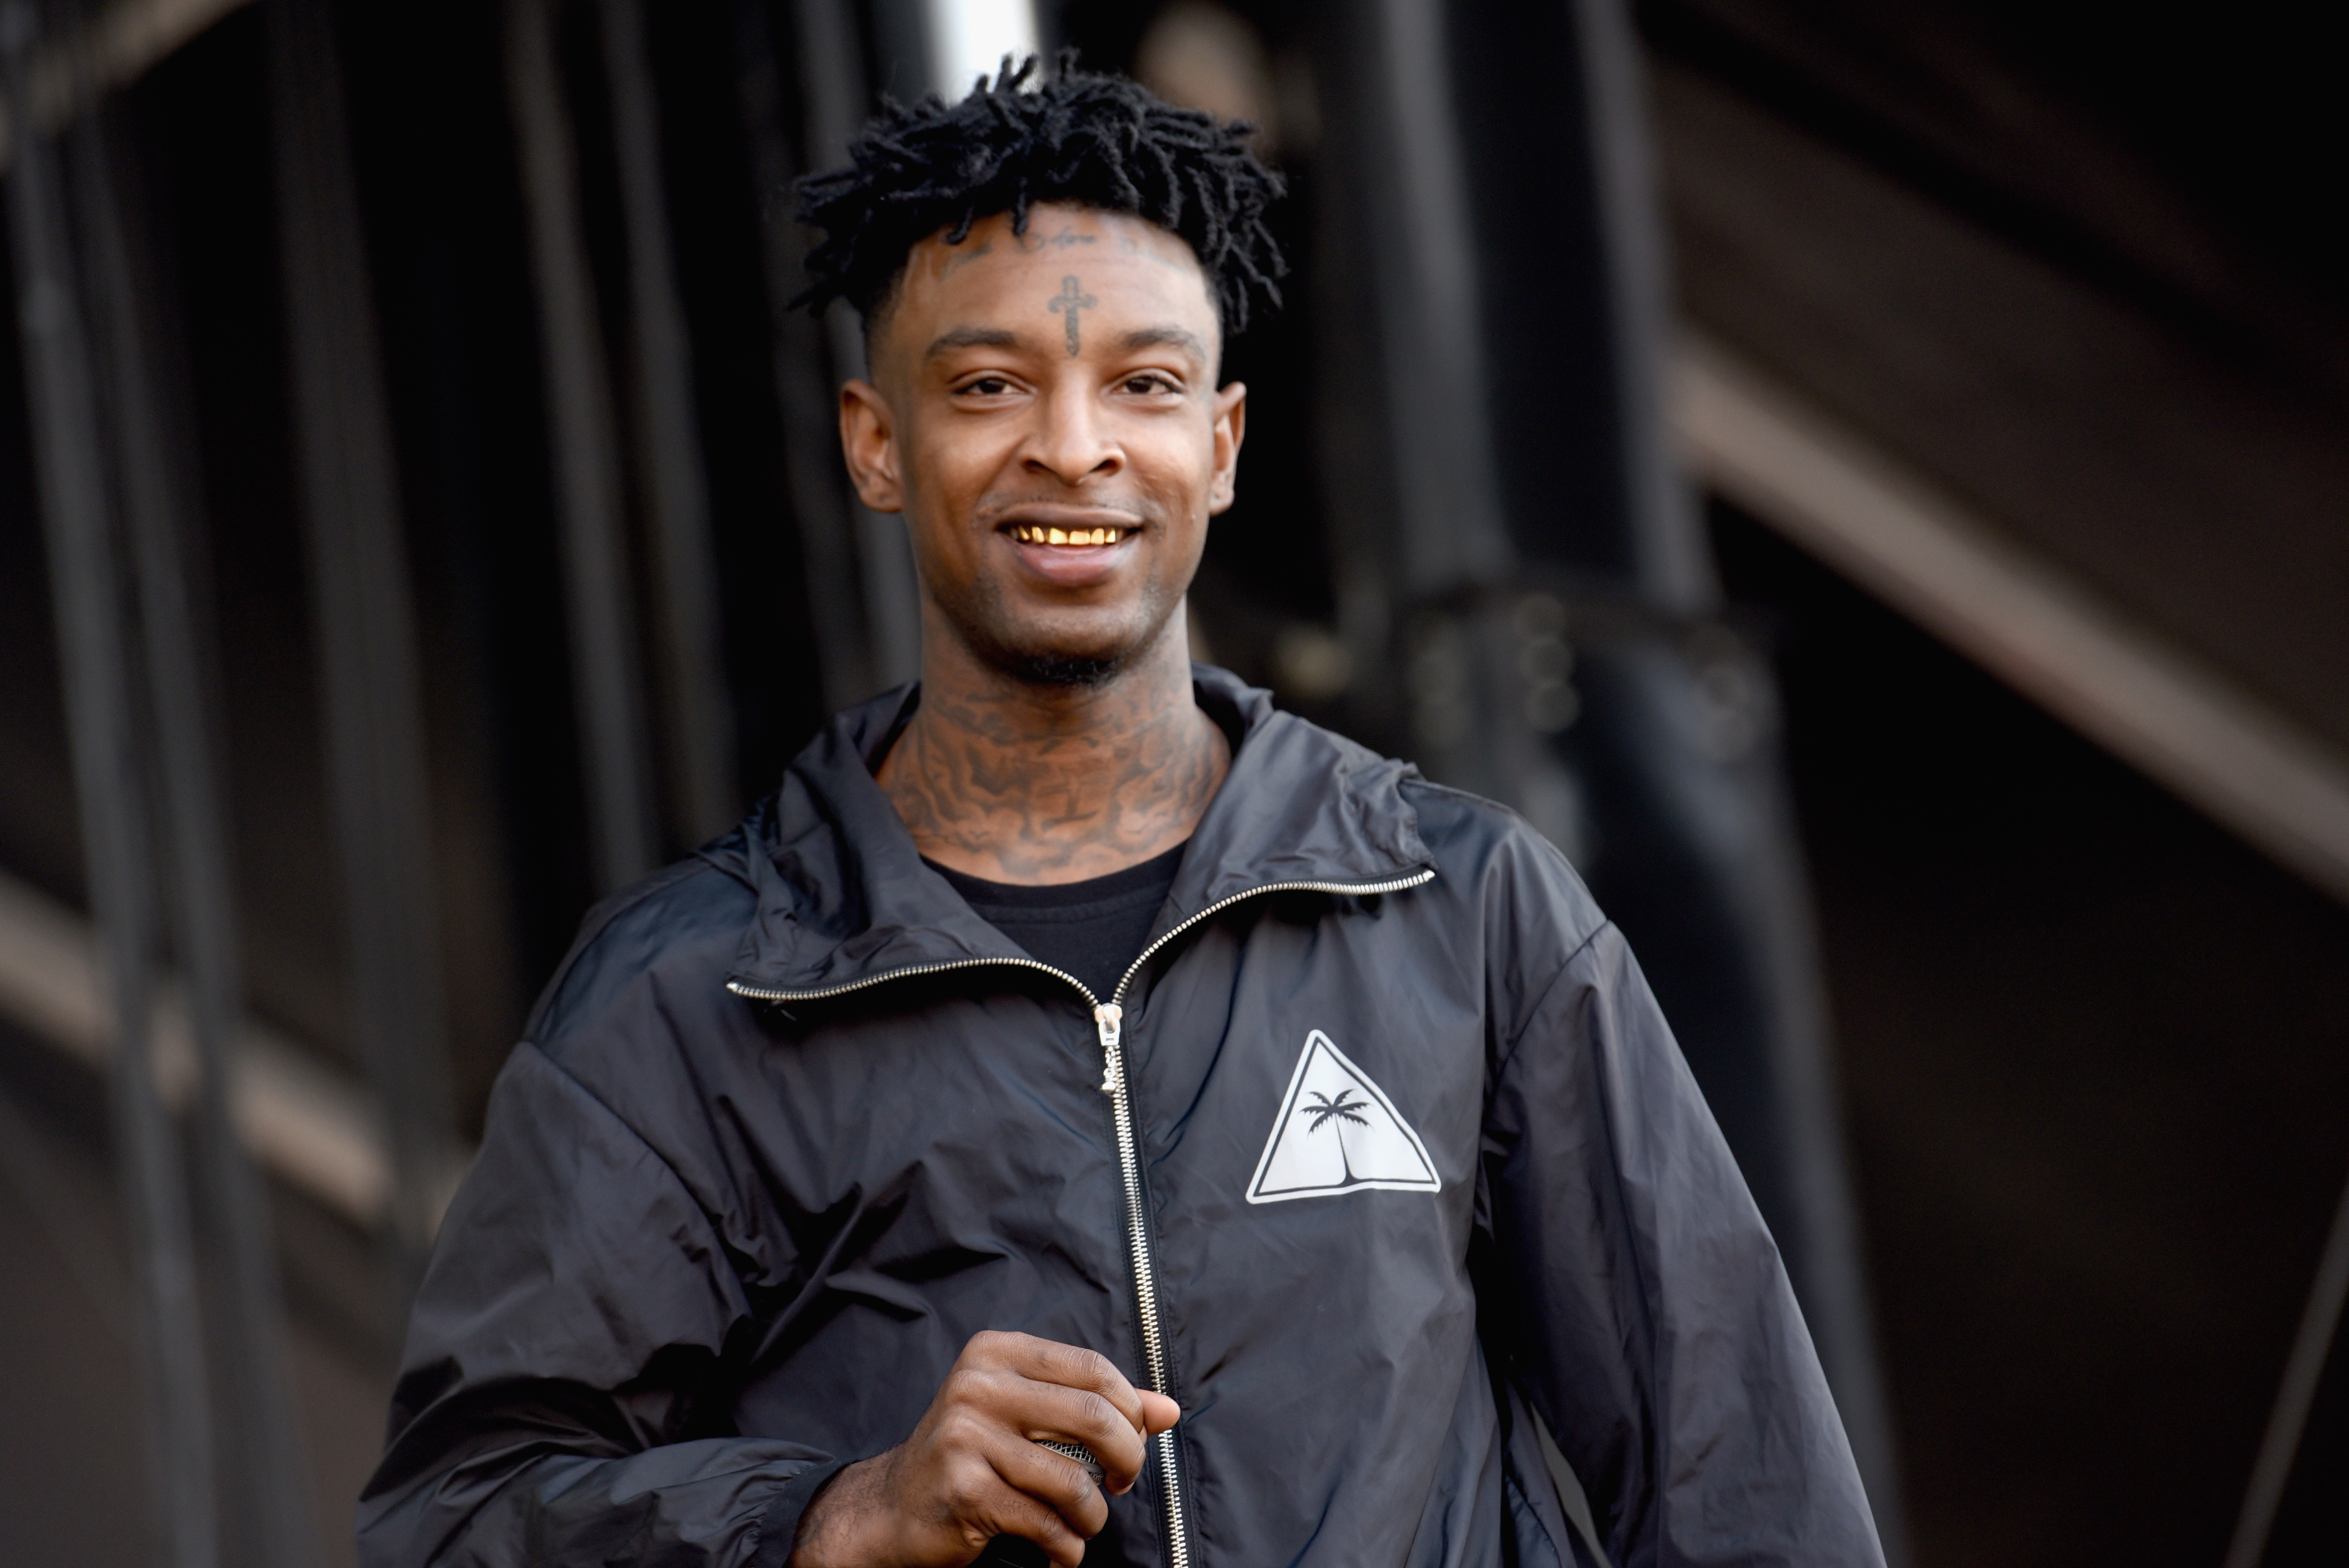 21 SAVAGE SPENDS $40K ON HIS KIDS AT THE GUCCI STORE